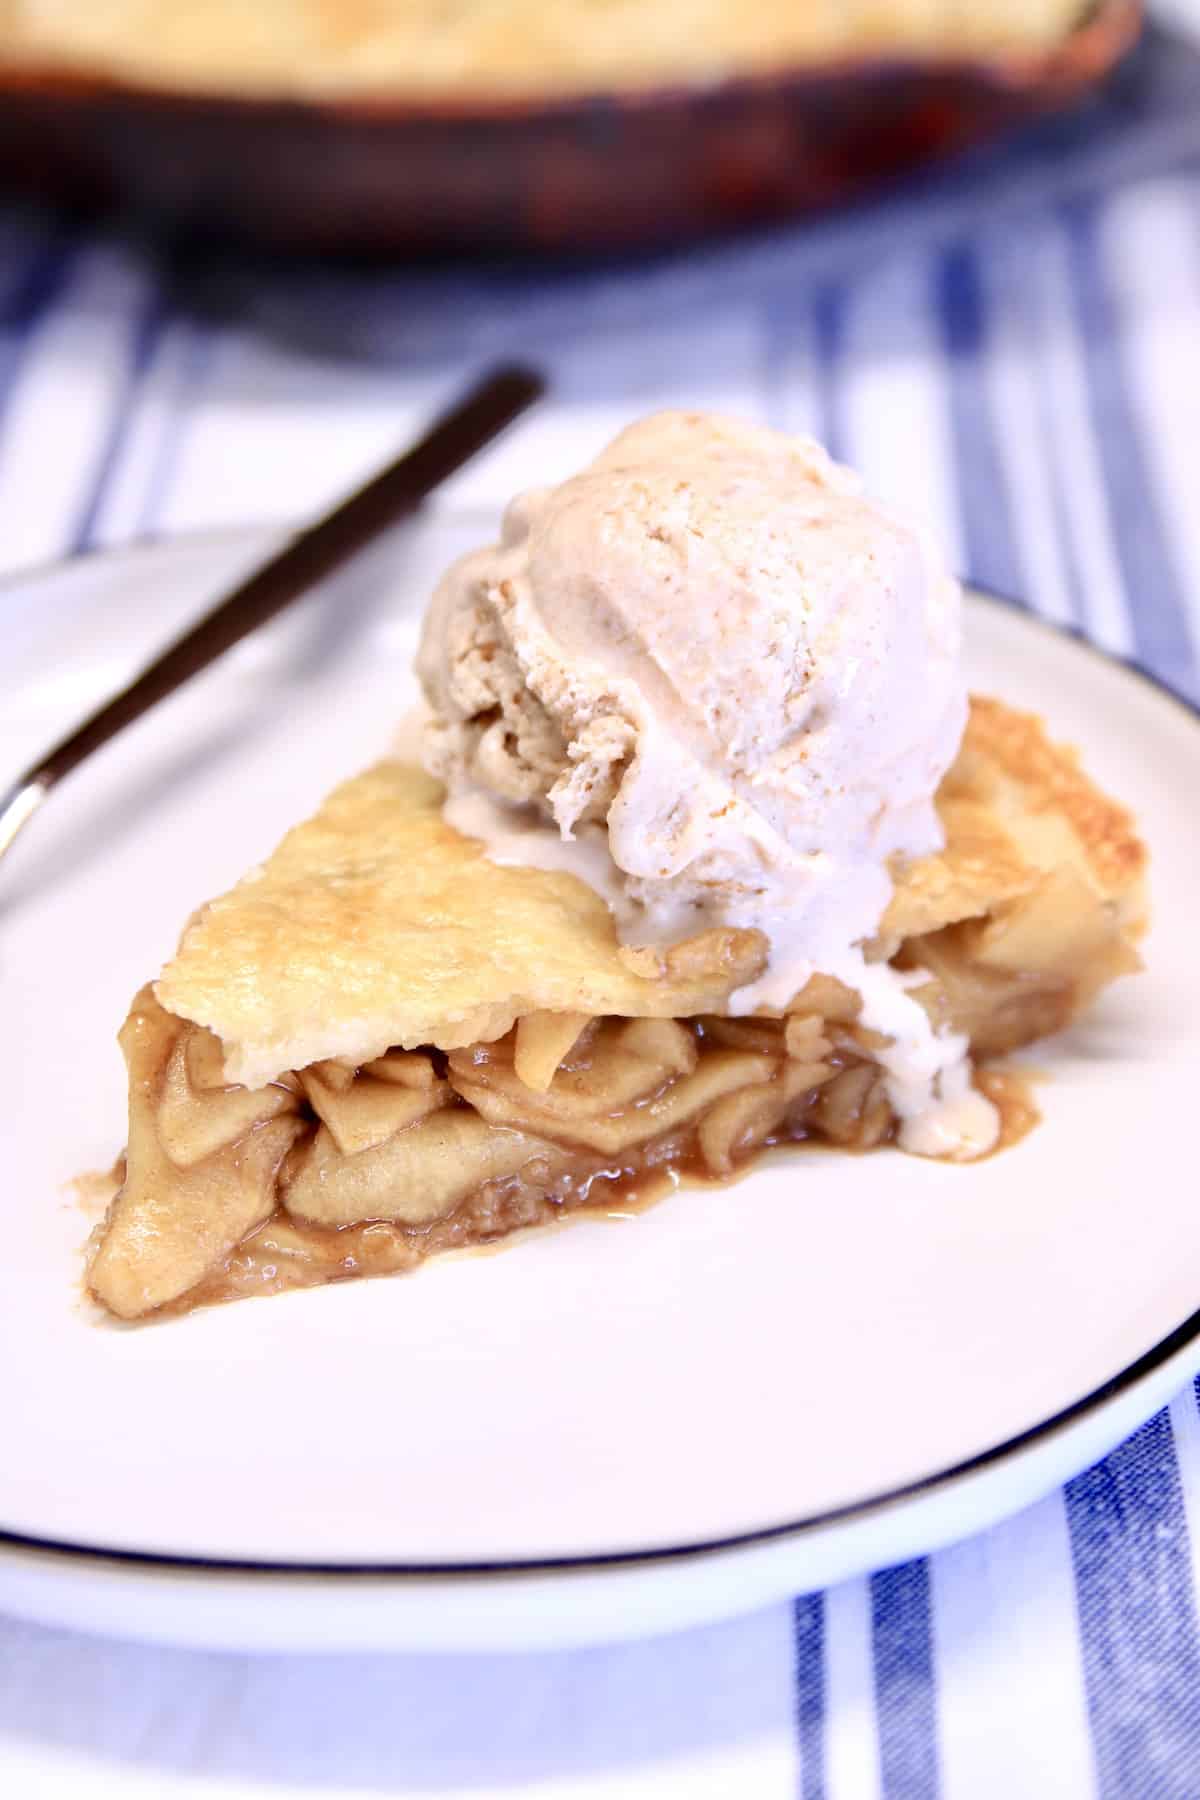 Slice of pie with ice cream on a plate.